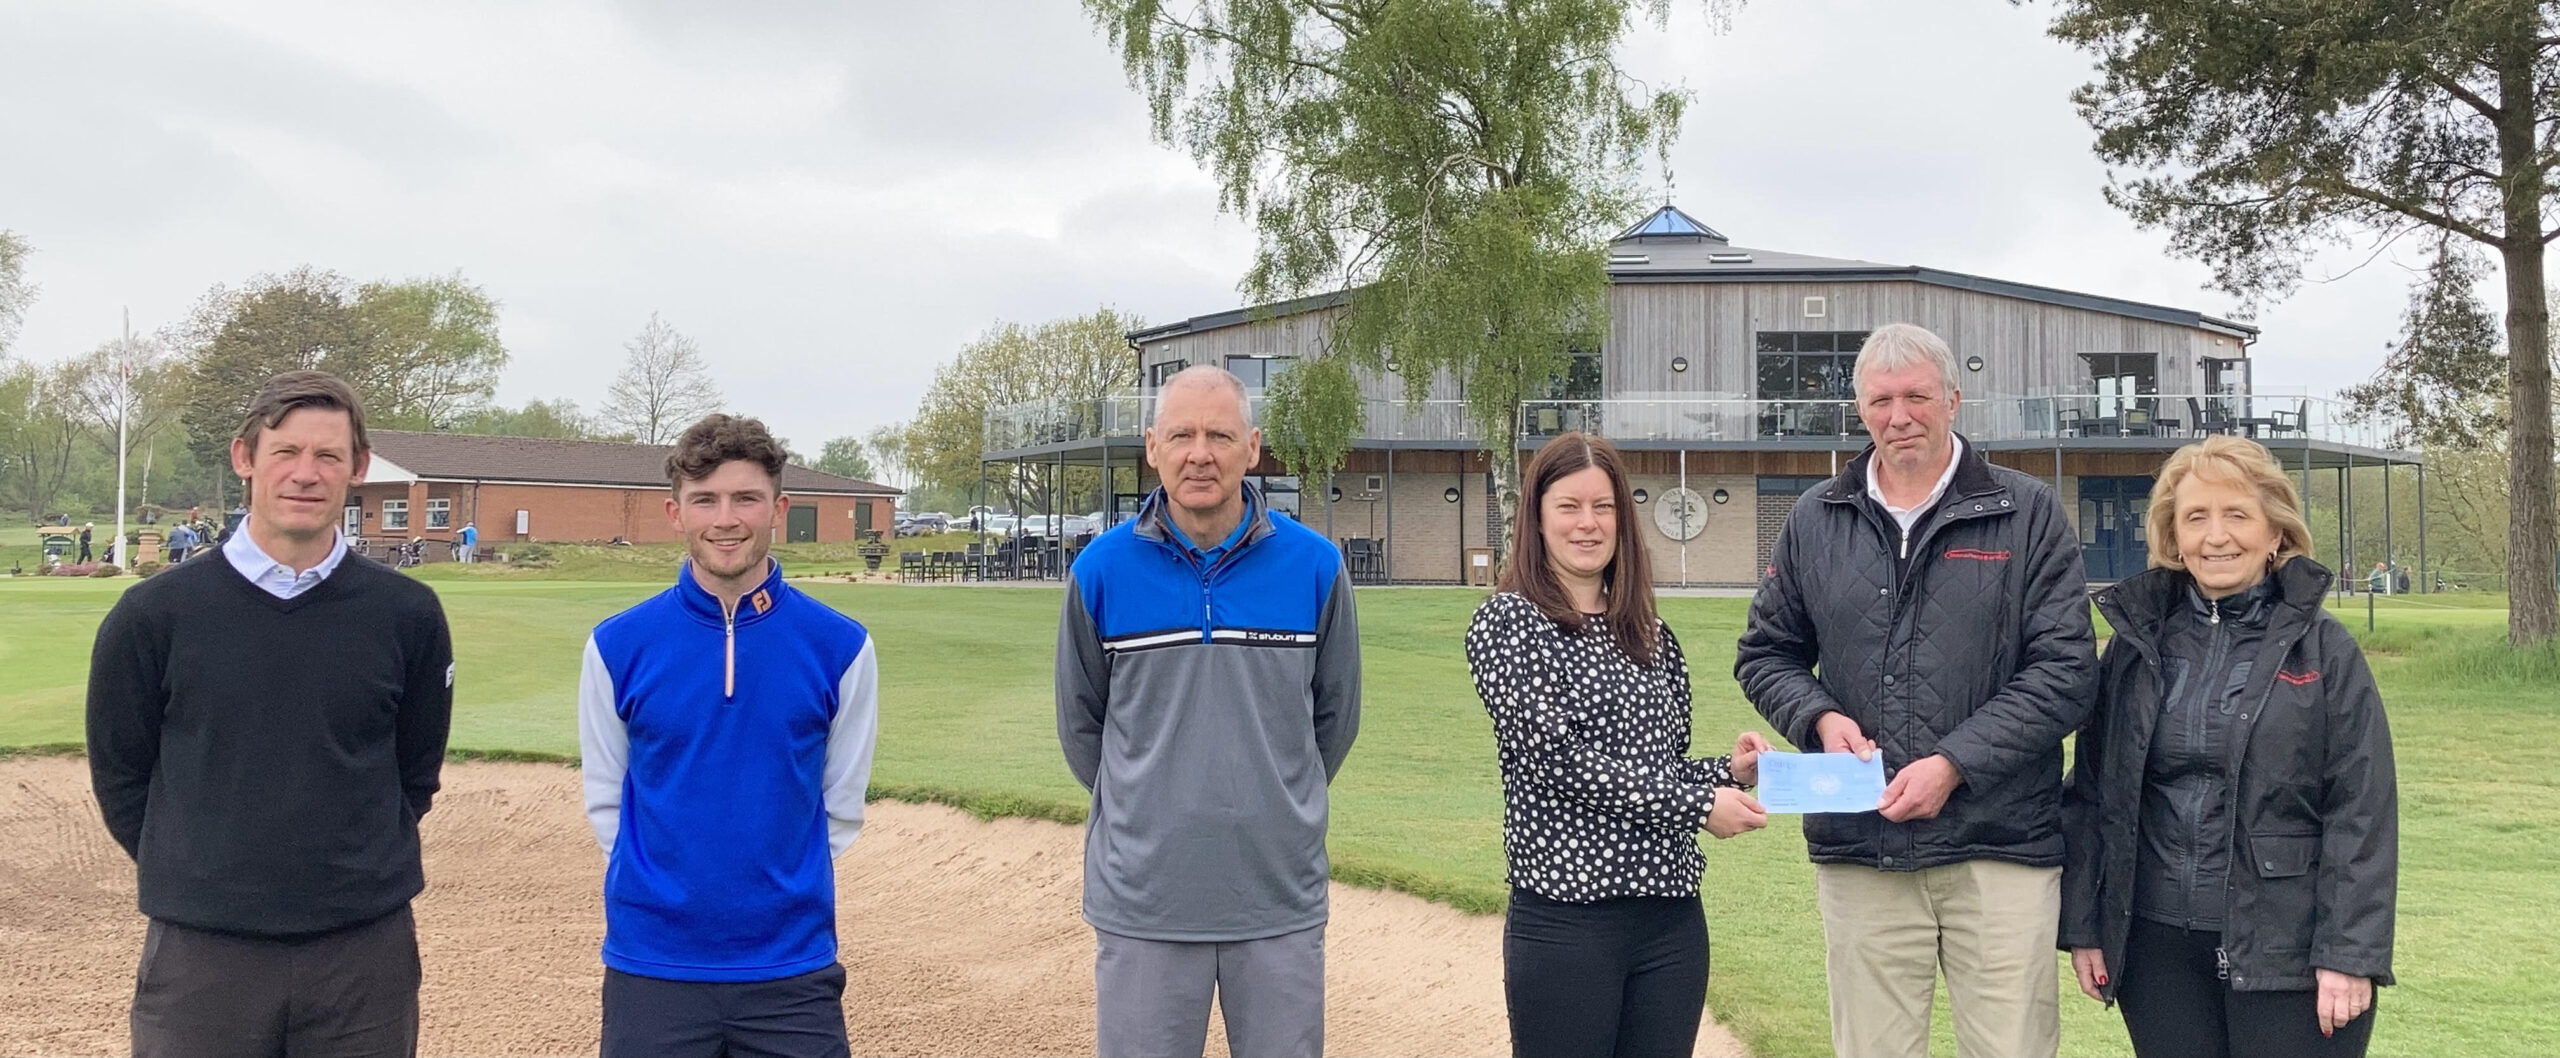 Mansfield-Sand-present-cheque-to-GolfHealth-project-2